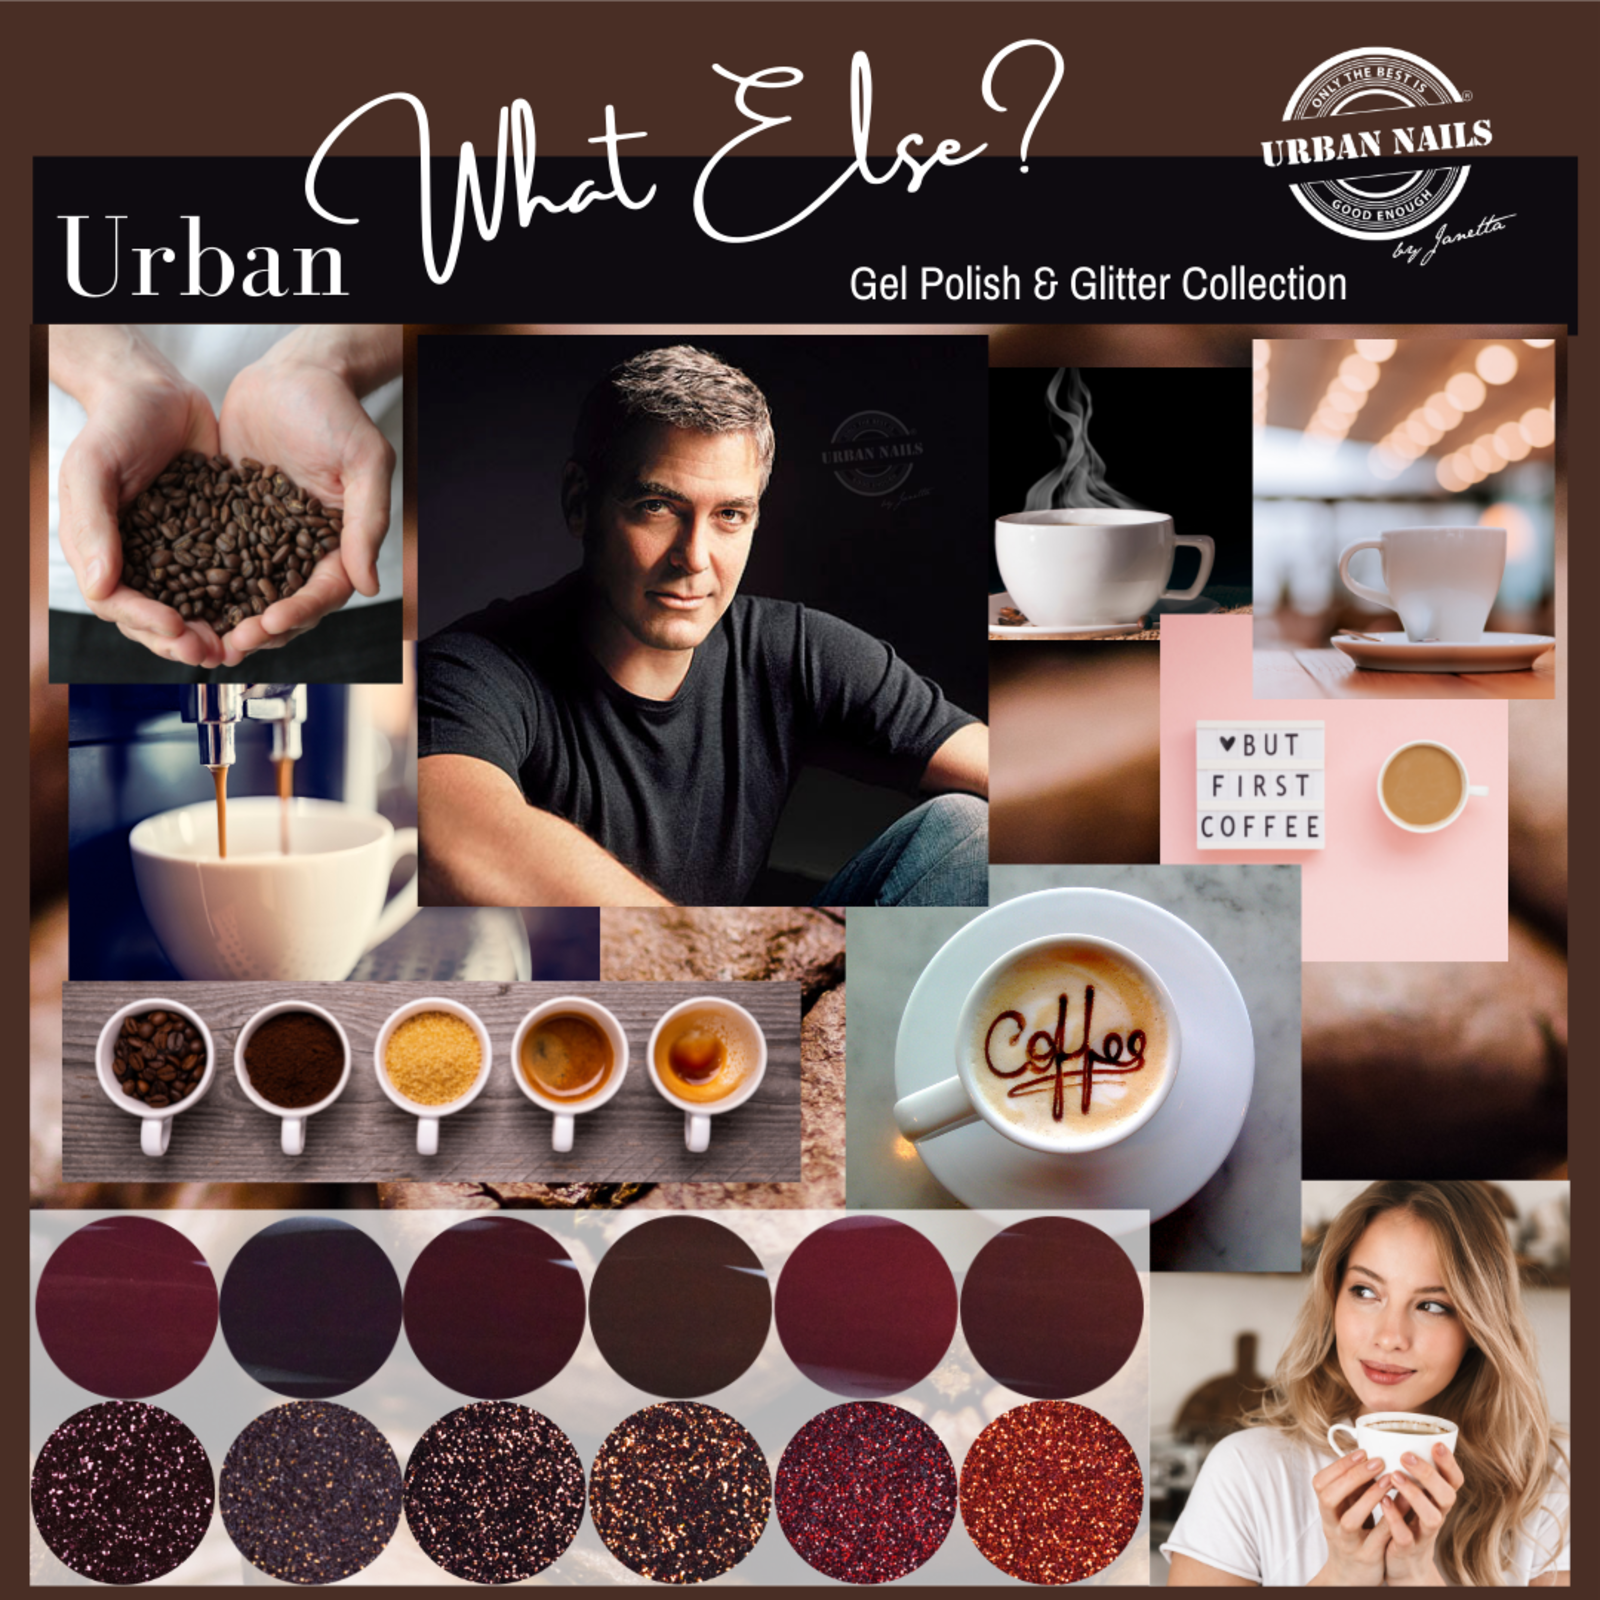 Urban nails Urban what els gelpolish collection icl gratis glitter collection